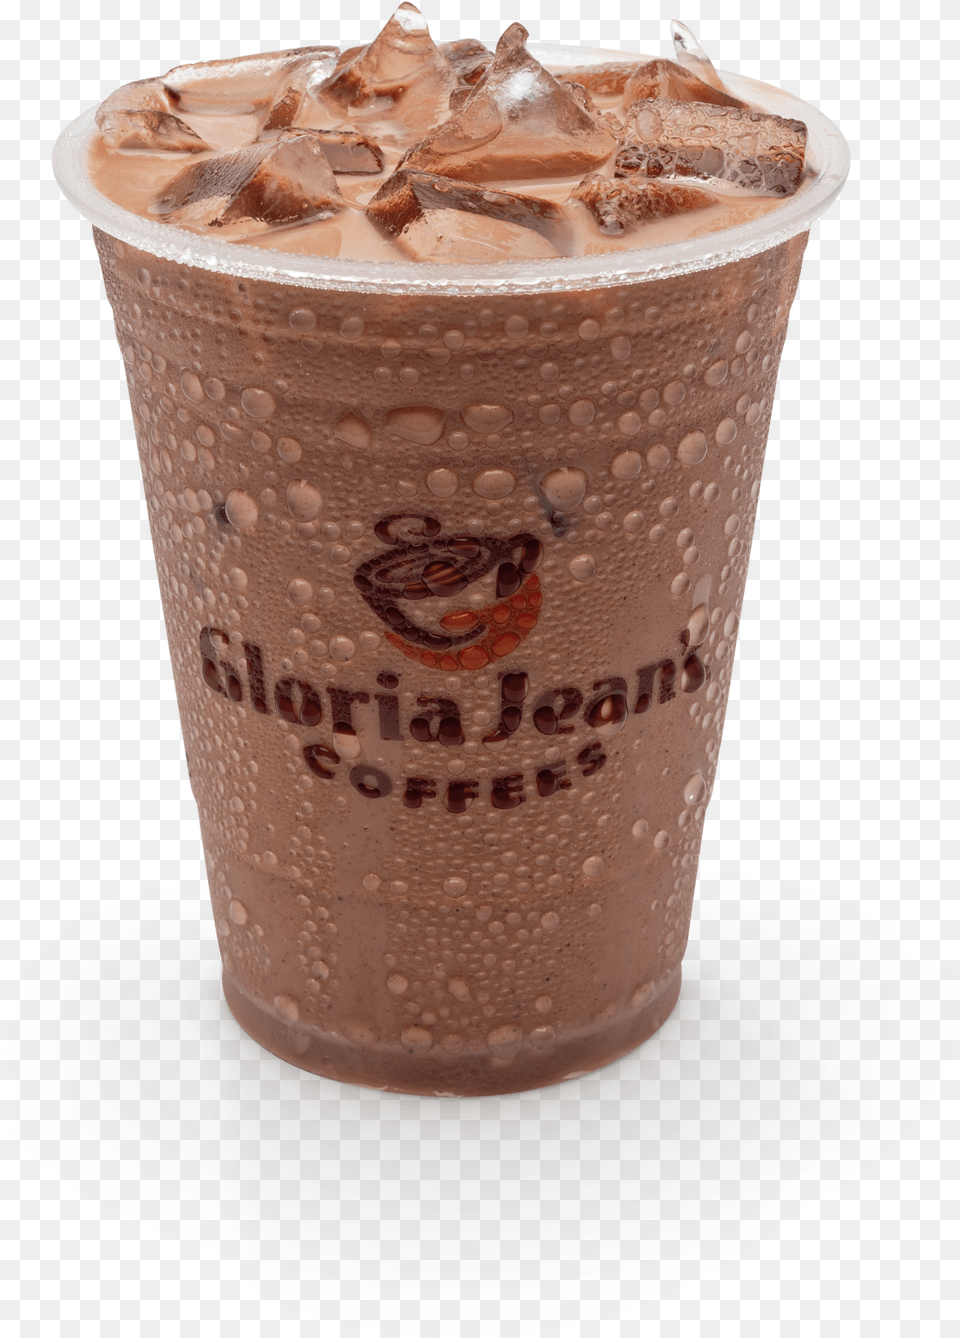 Gloria Jeans Iced Chocolate, Cup, Beverage, Dessert, Food Png Image